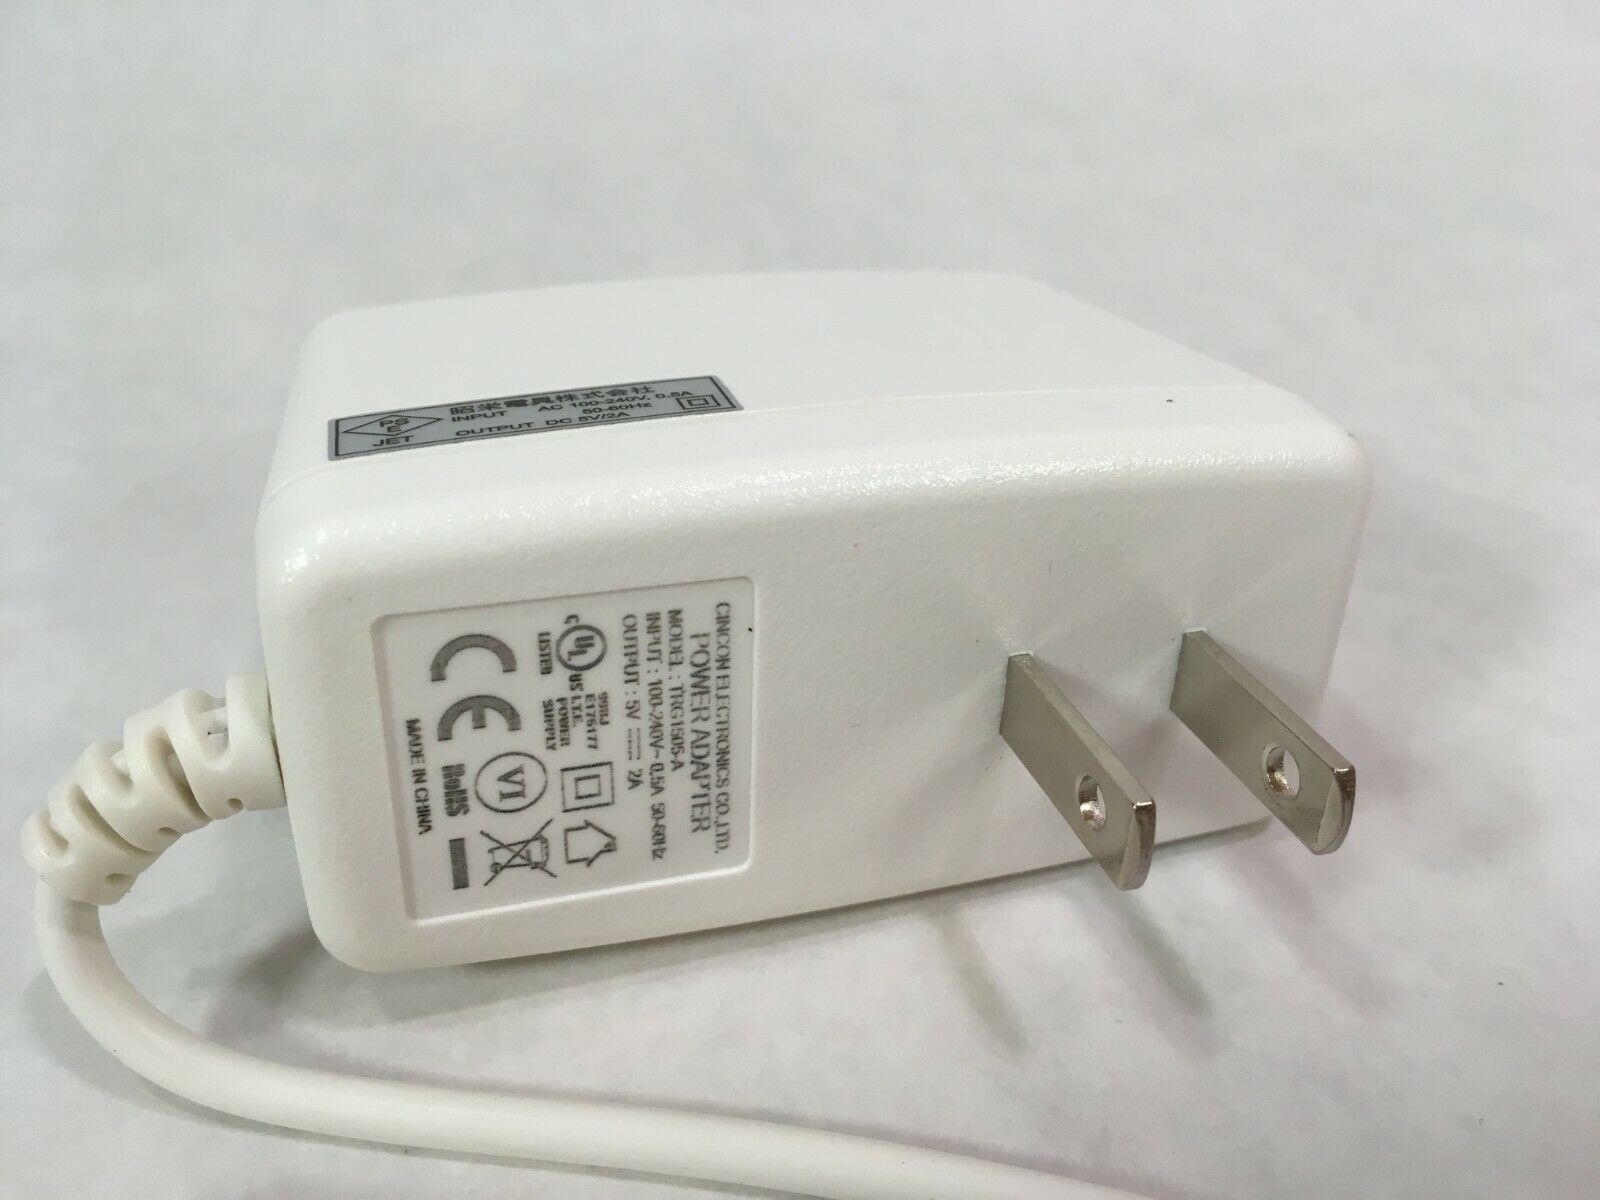 NEW Cincon Electronics TRG1505-A Power Adapter Charger 5V 2A 10W